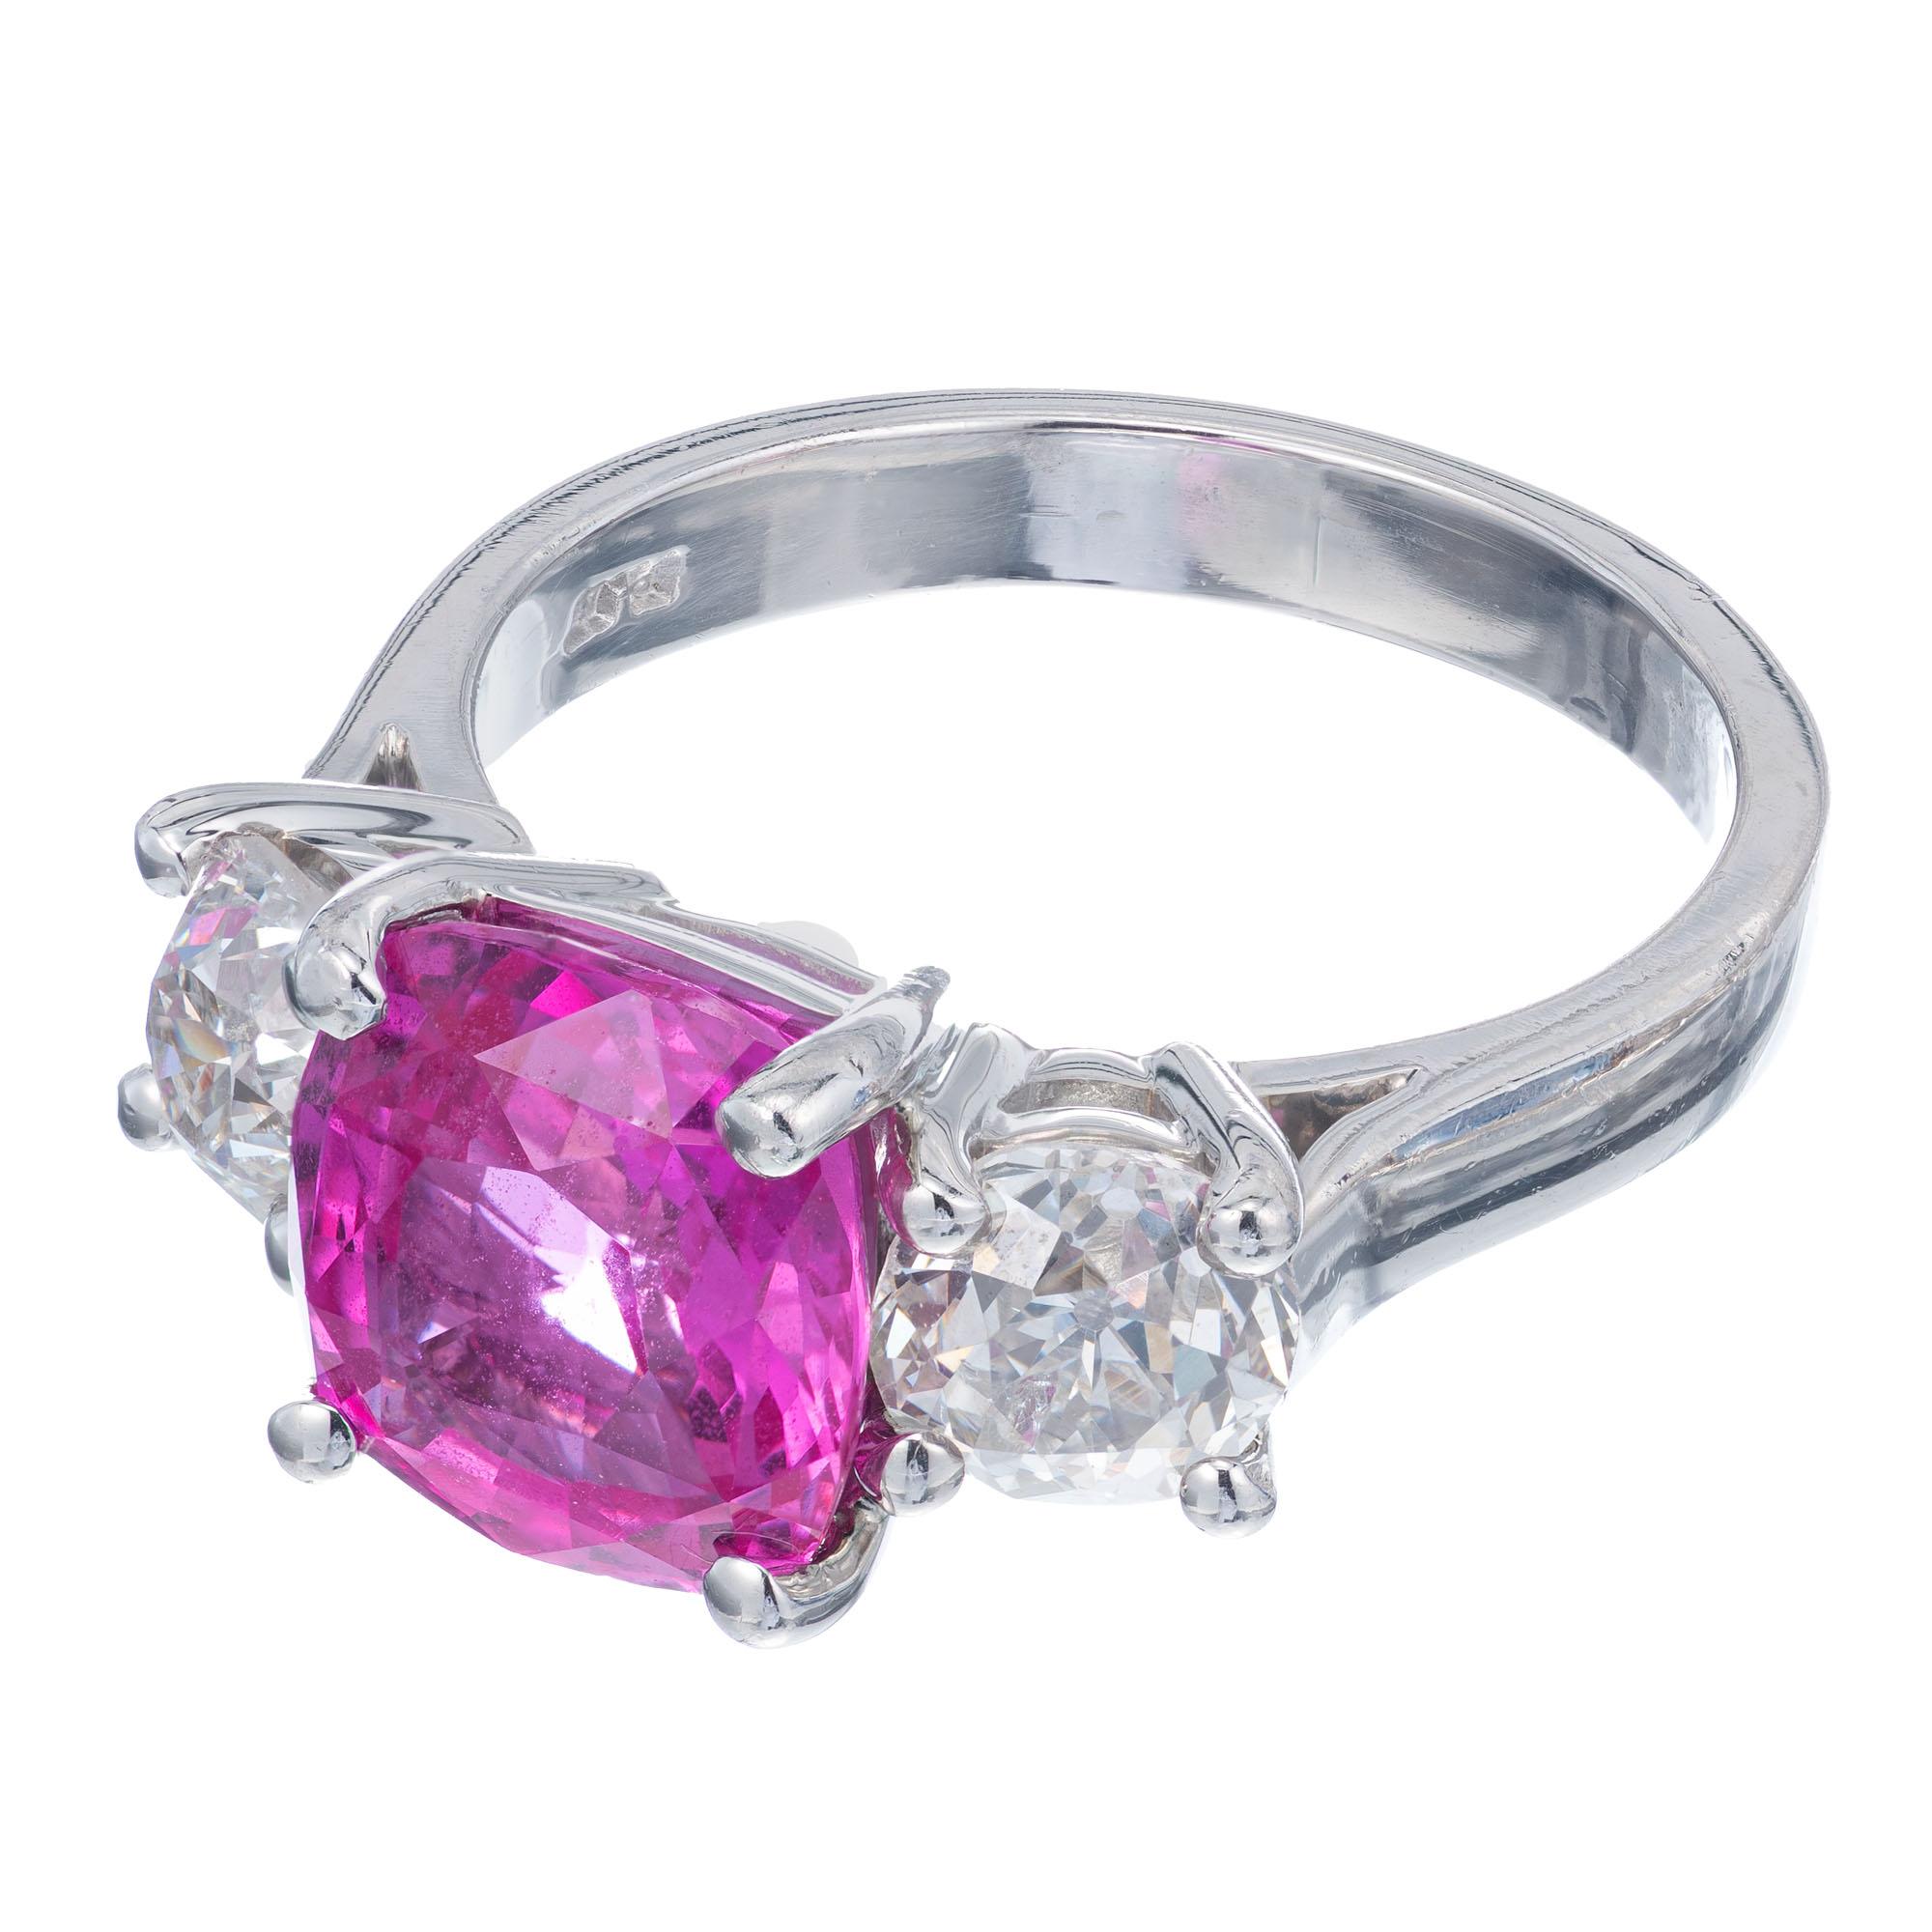 Peter Suchy GIA 4.02 Carat Pink Sapphire Diamond Platinum Engagement Ring For Sale 2